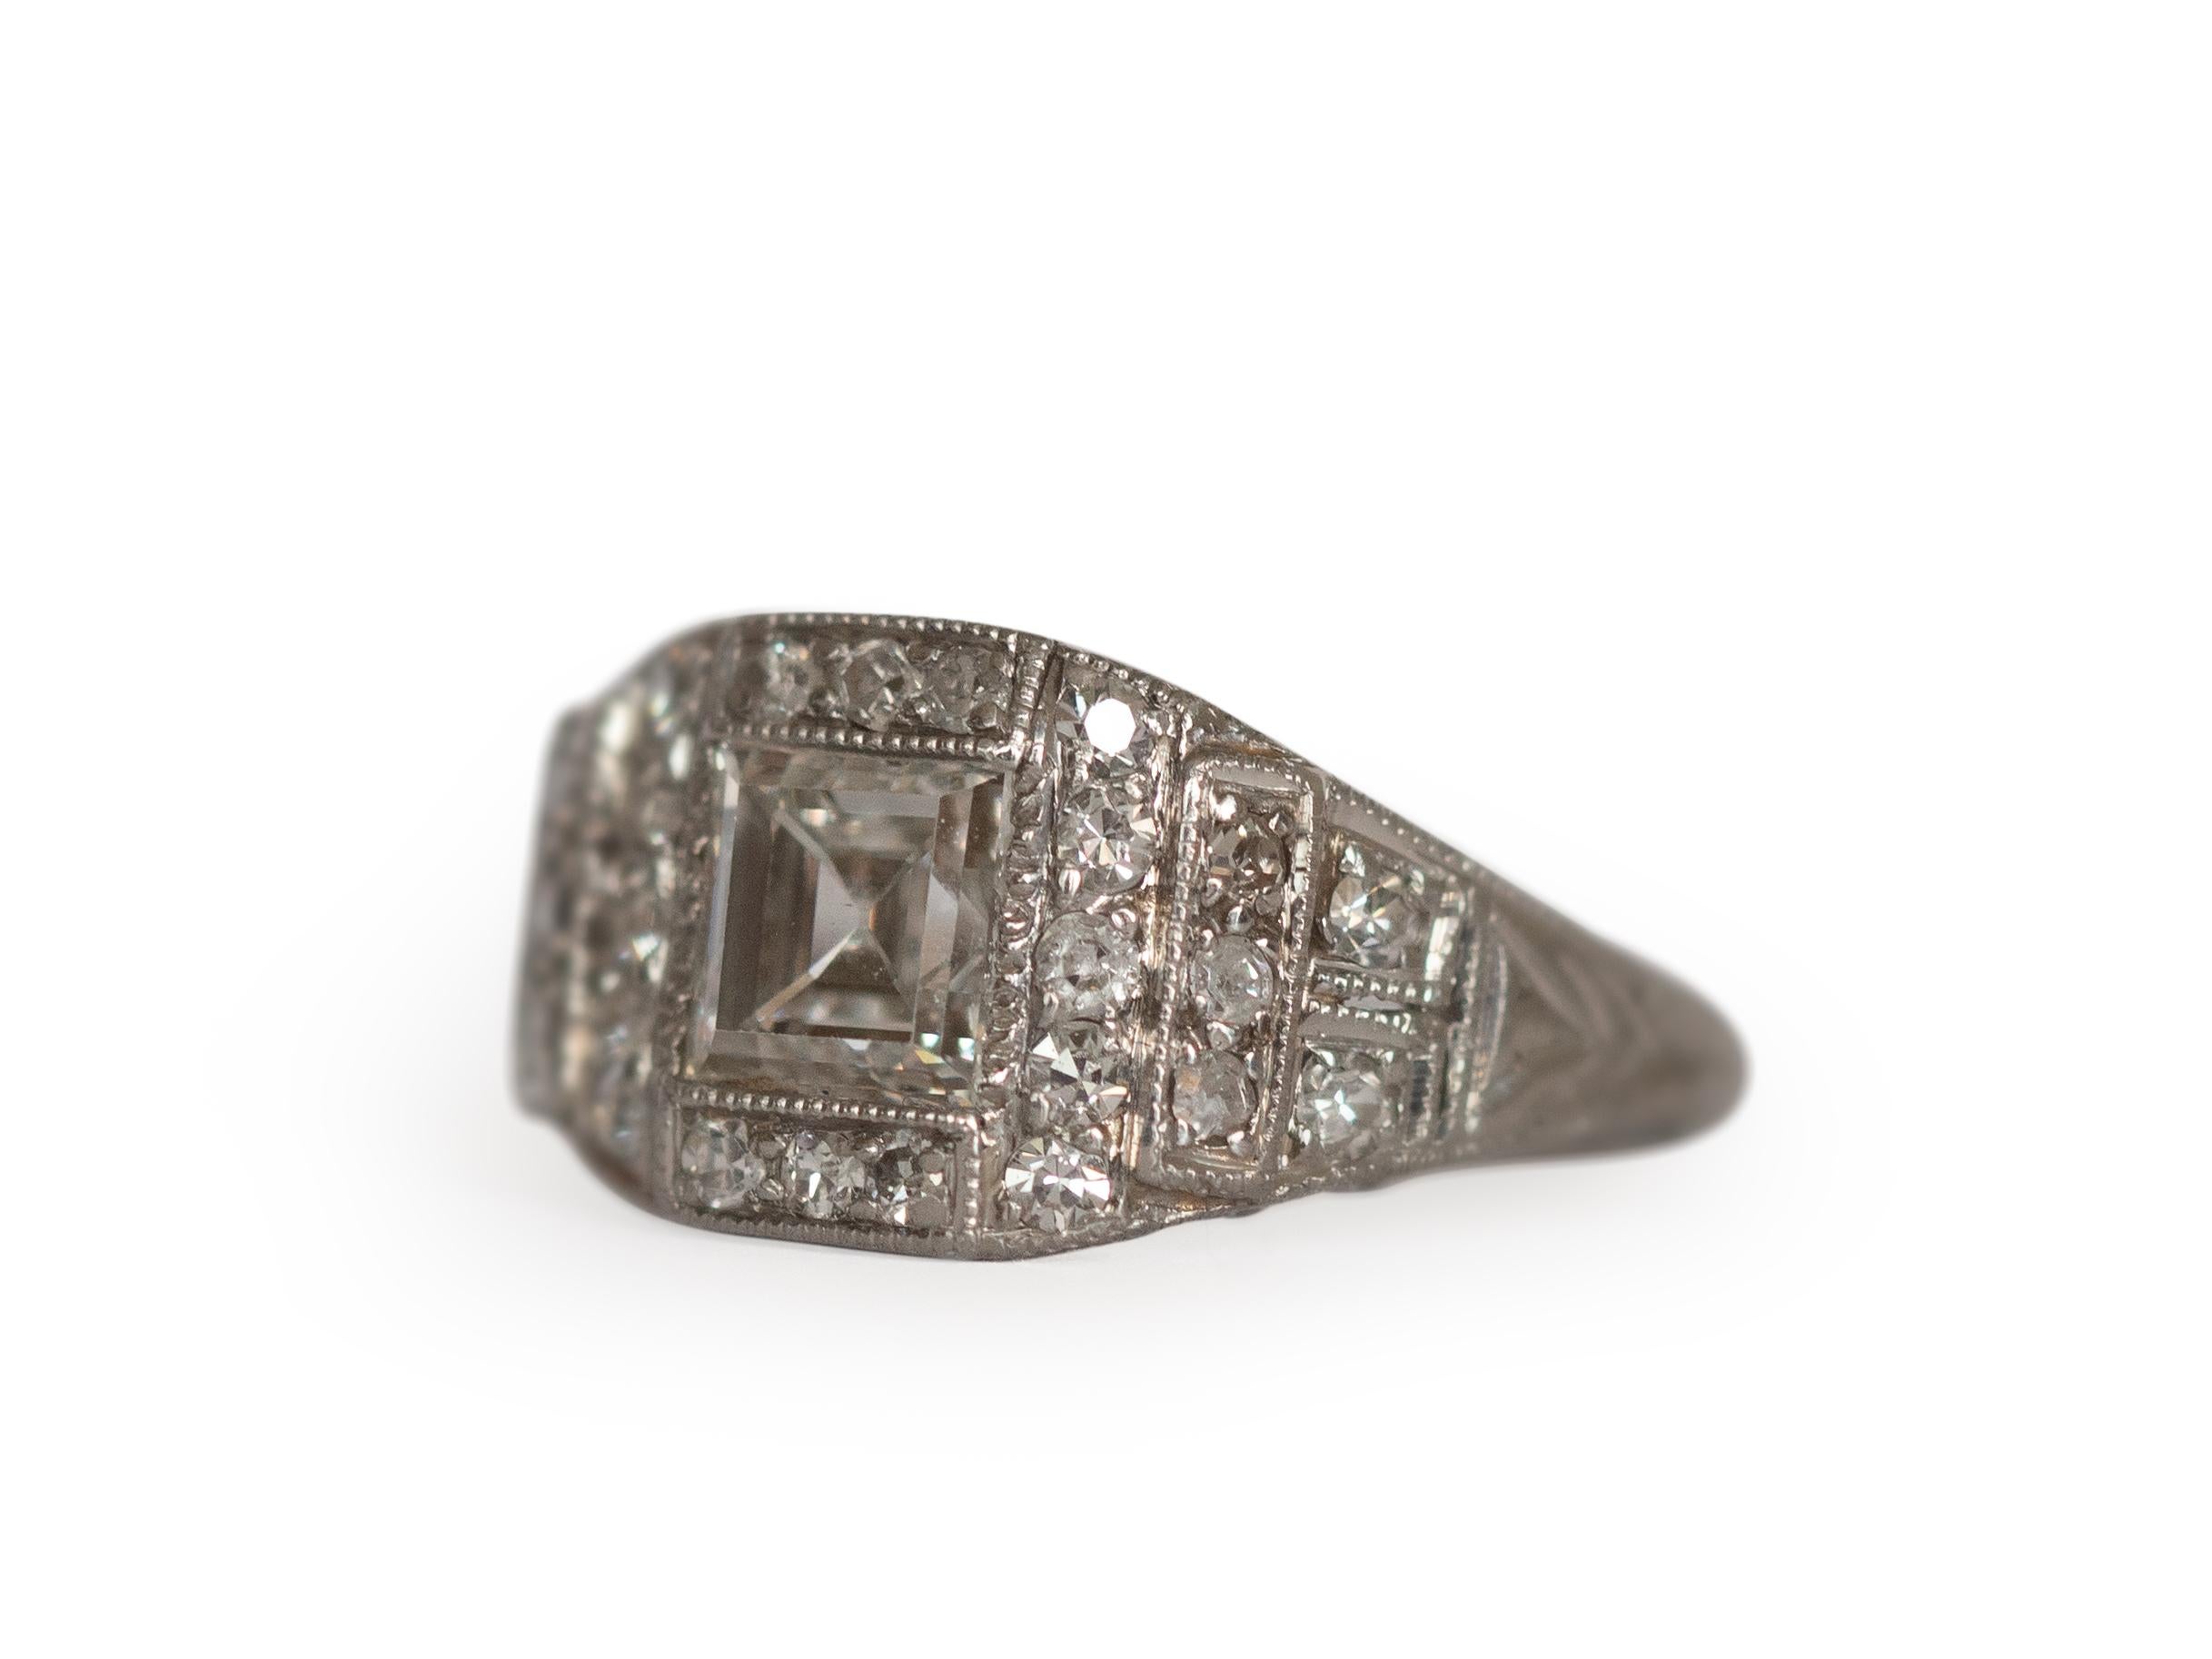 Item Details: 
Ring Size: 4
Metal Type: Platinum [Hallmarked, and Tested]
Weight: 3.1 grams

Center Diamond Details:
Weight: 1.00 Carat
Cut: Antique Carre Cut
Color: E/F
Clarity: VS1

Side Diamond Details:
Weight: .25 Carat Total Weight
Cut: Antique